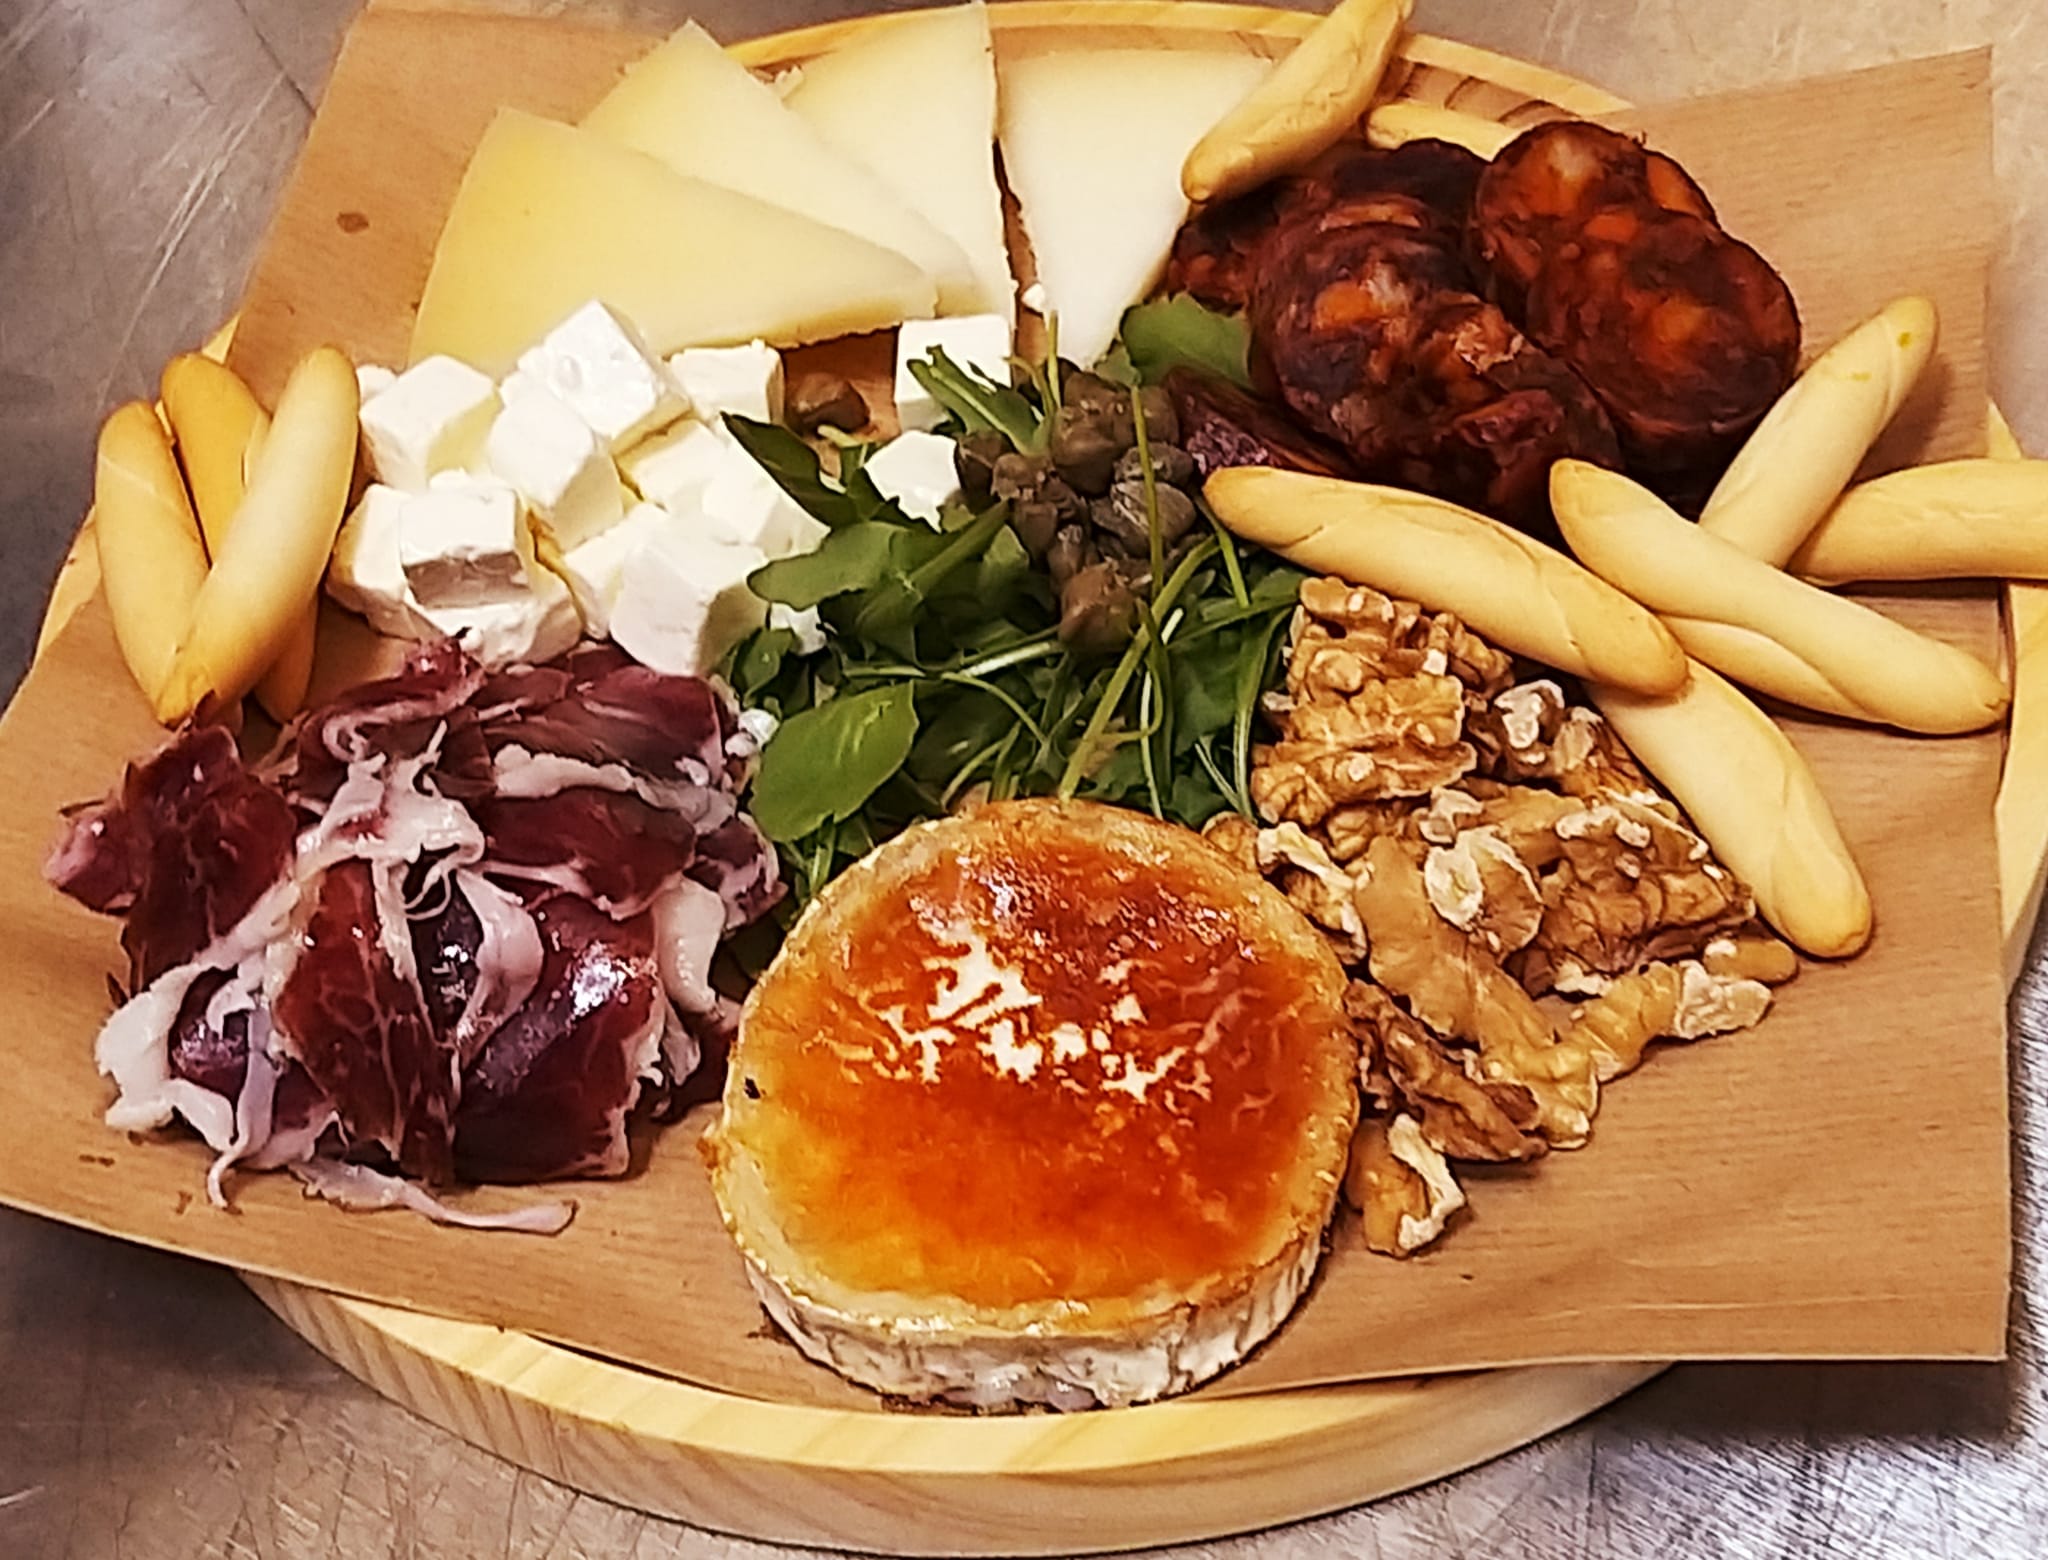 Cold meat and cheese assortment